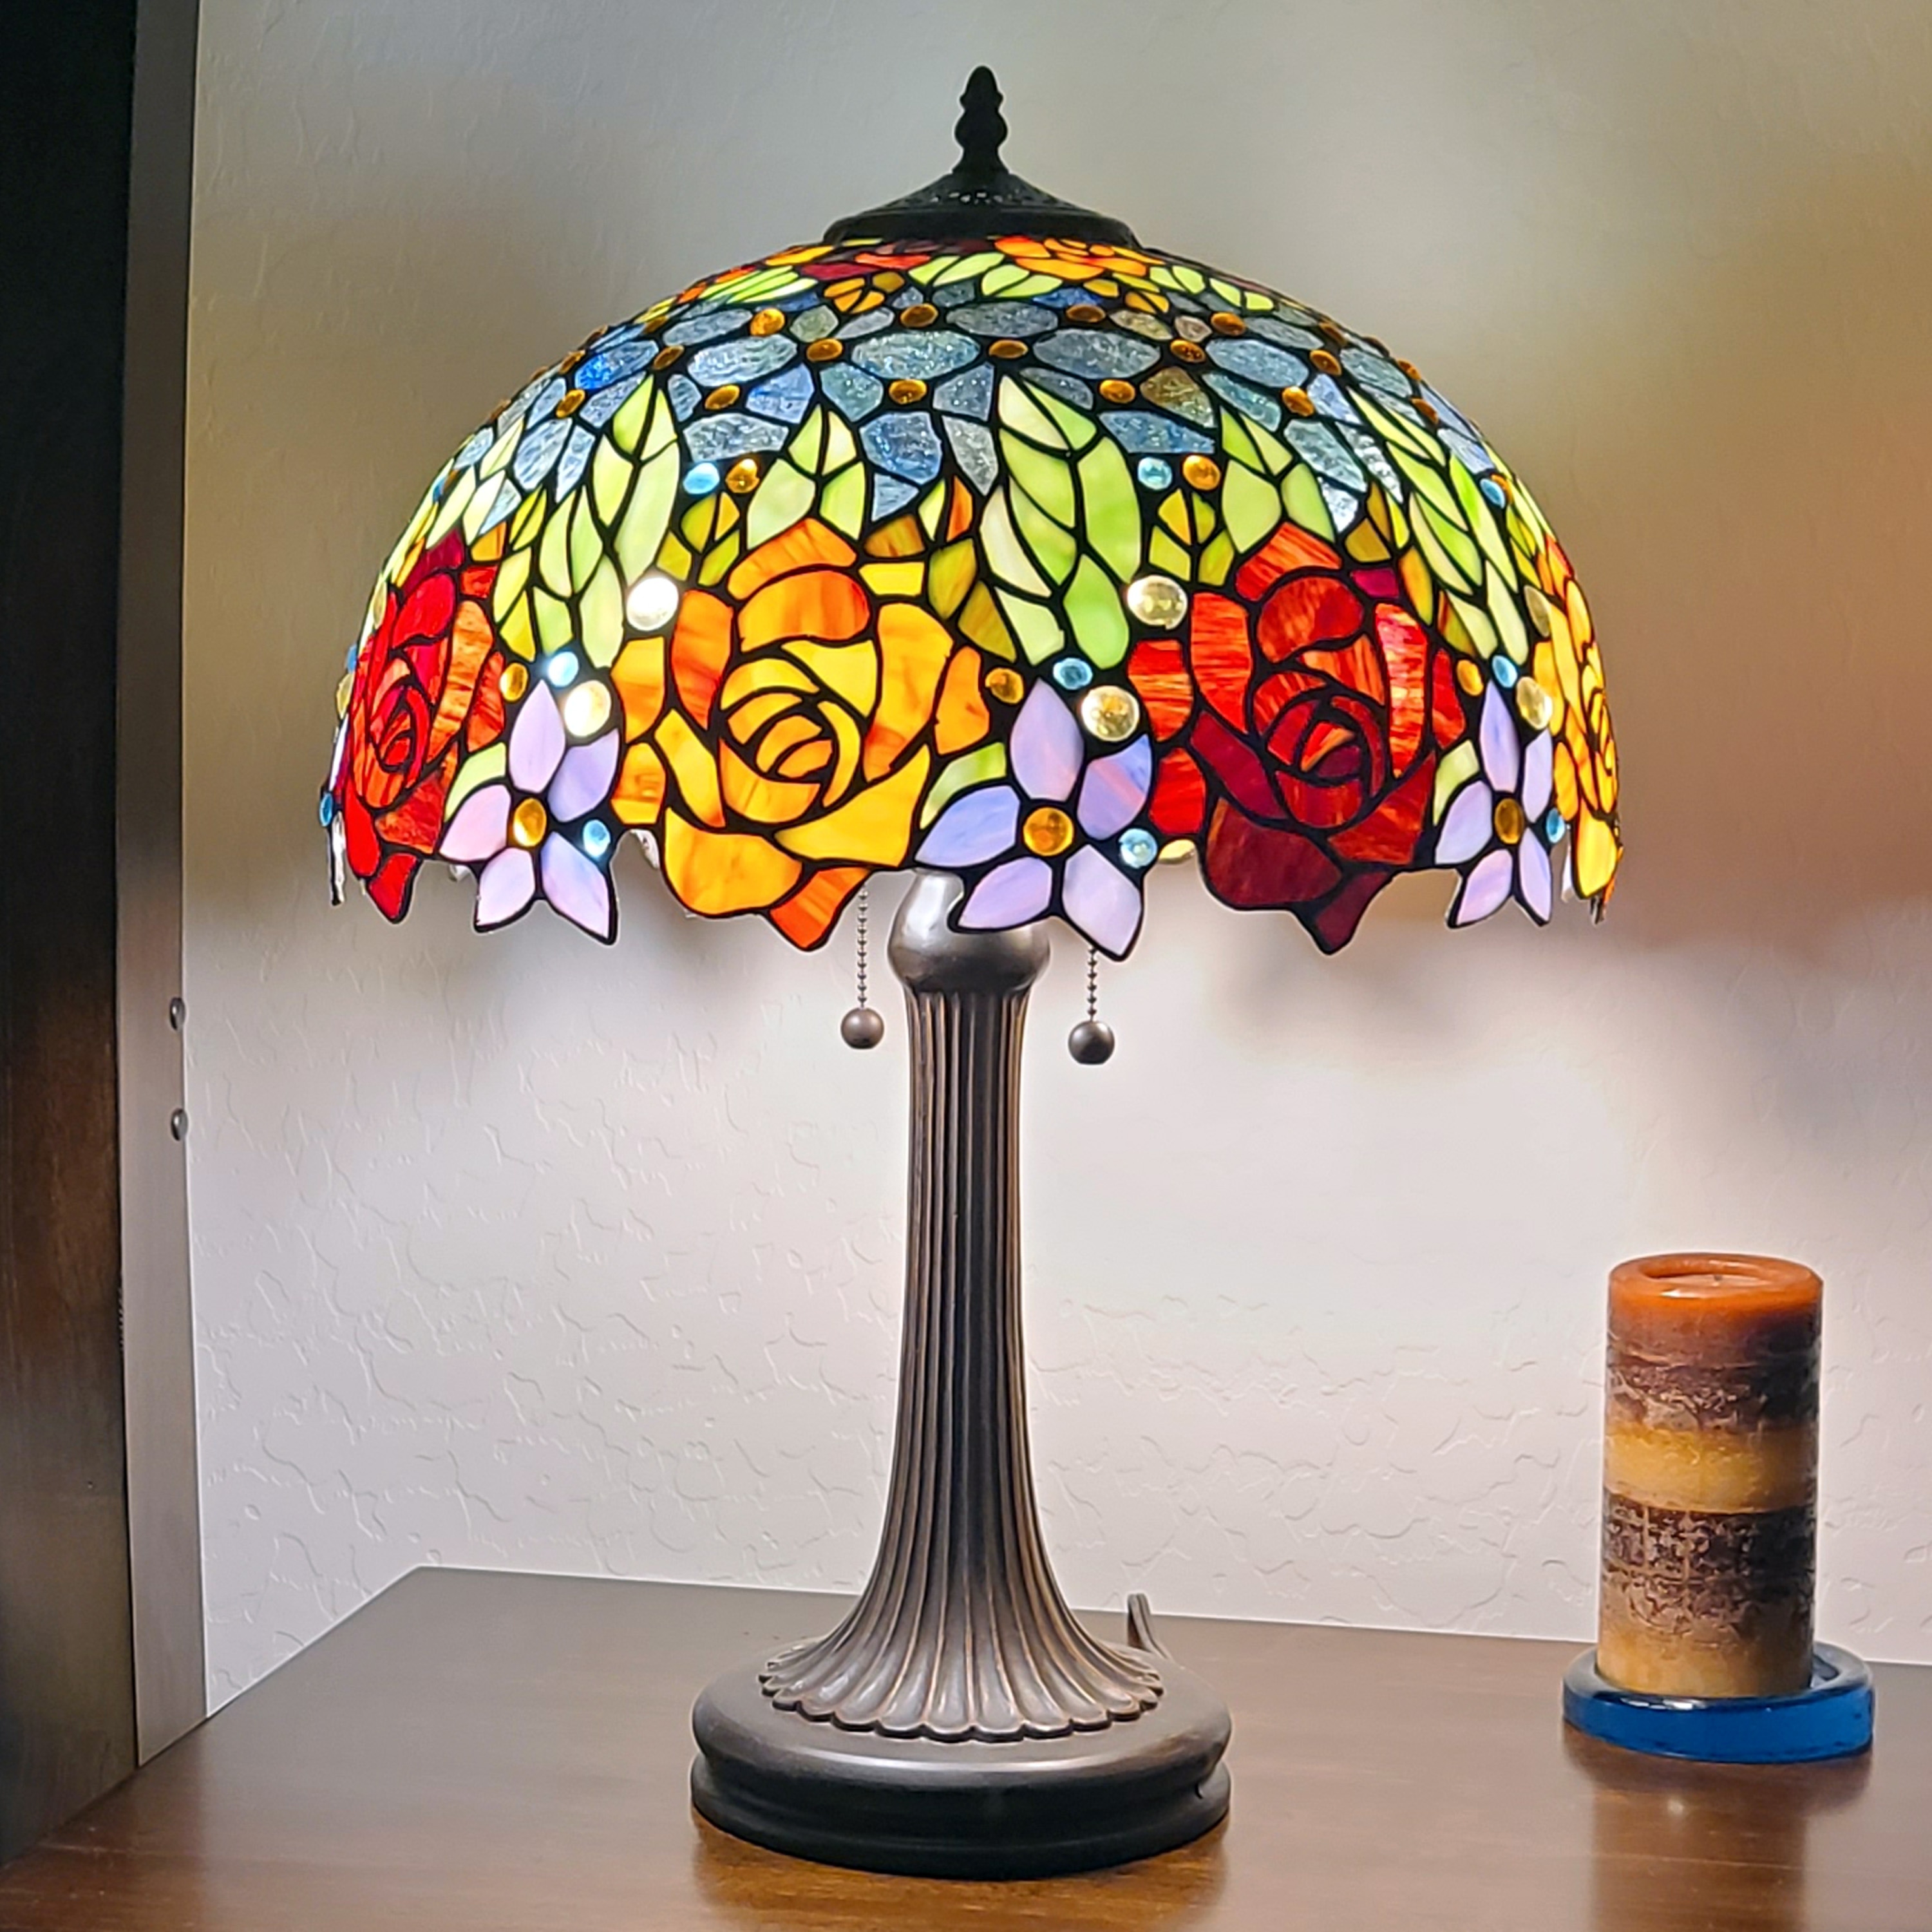 Bankers Lamp, Library Lamp, Tiffany Lamp, Stained Glass Lamp, Table Lamp,  Office Decor, Table Decor, Desk Lamp, Art Deco Lamp, Tiffany -  Canada